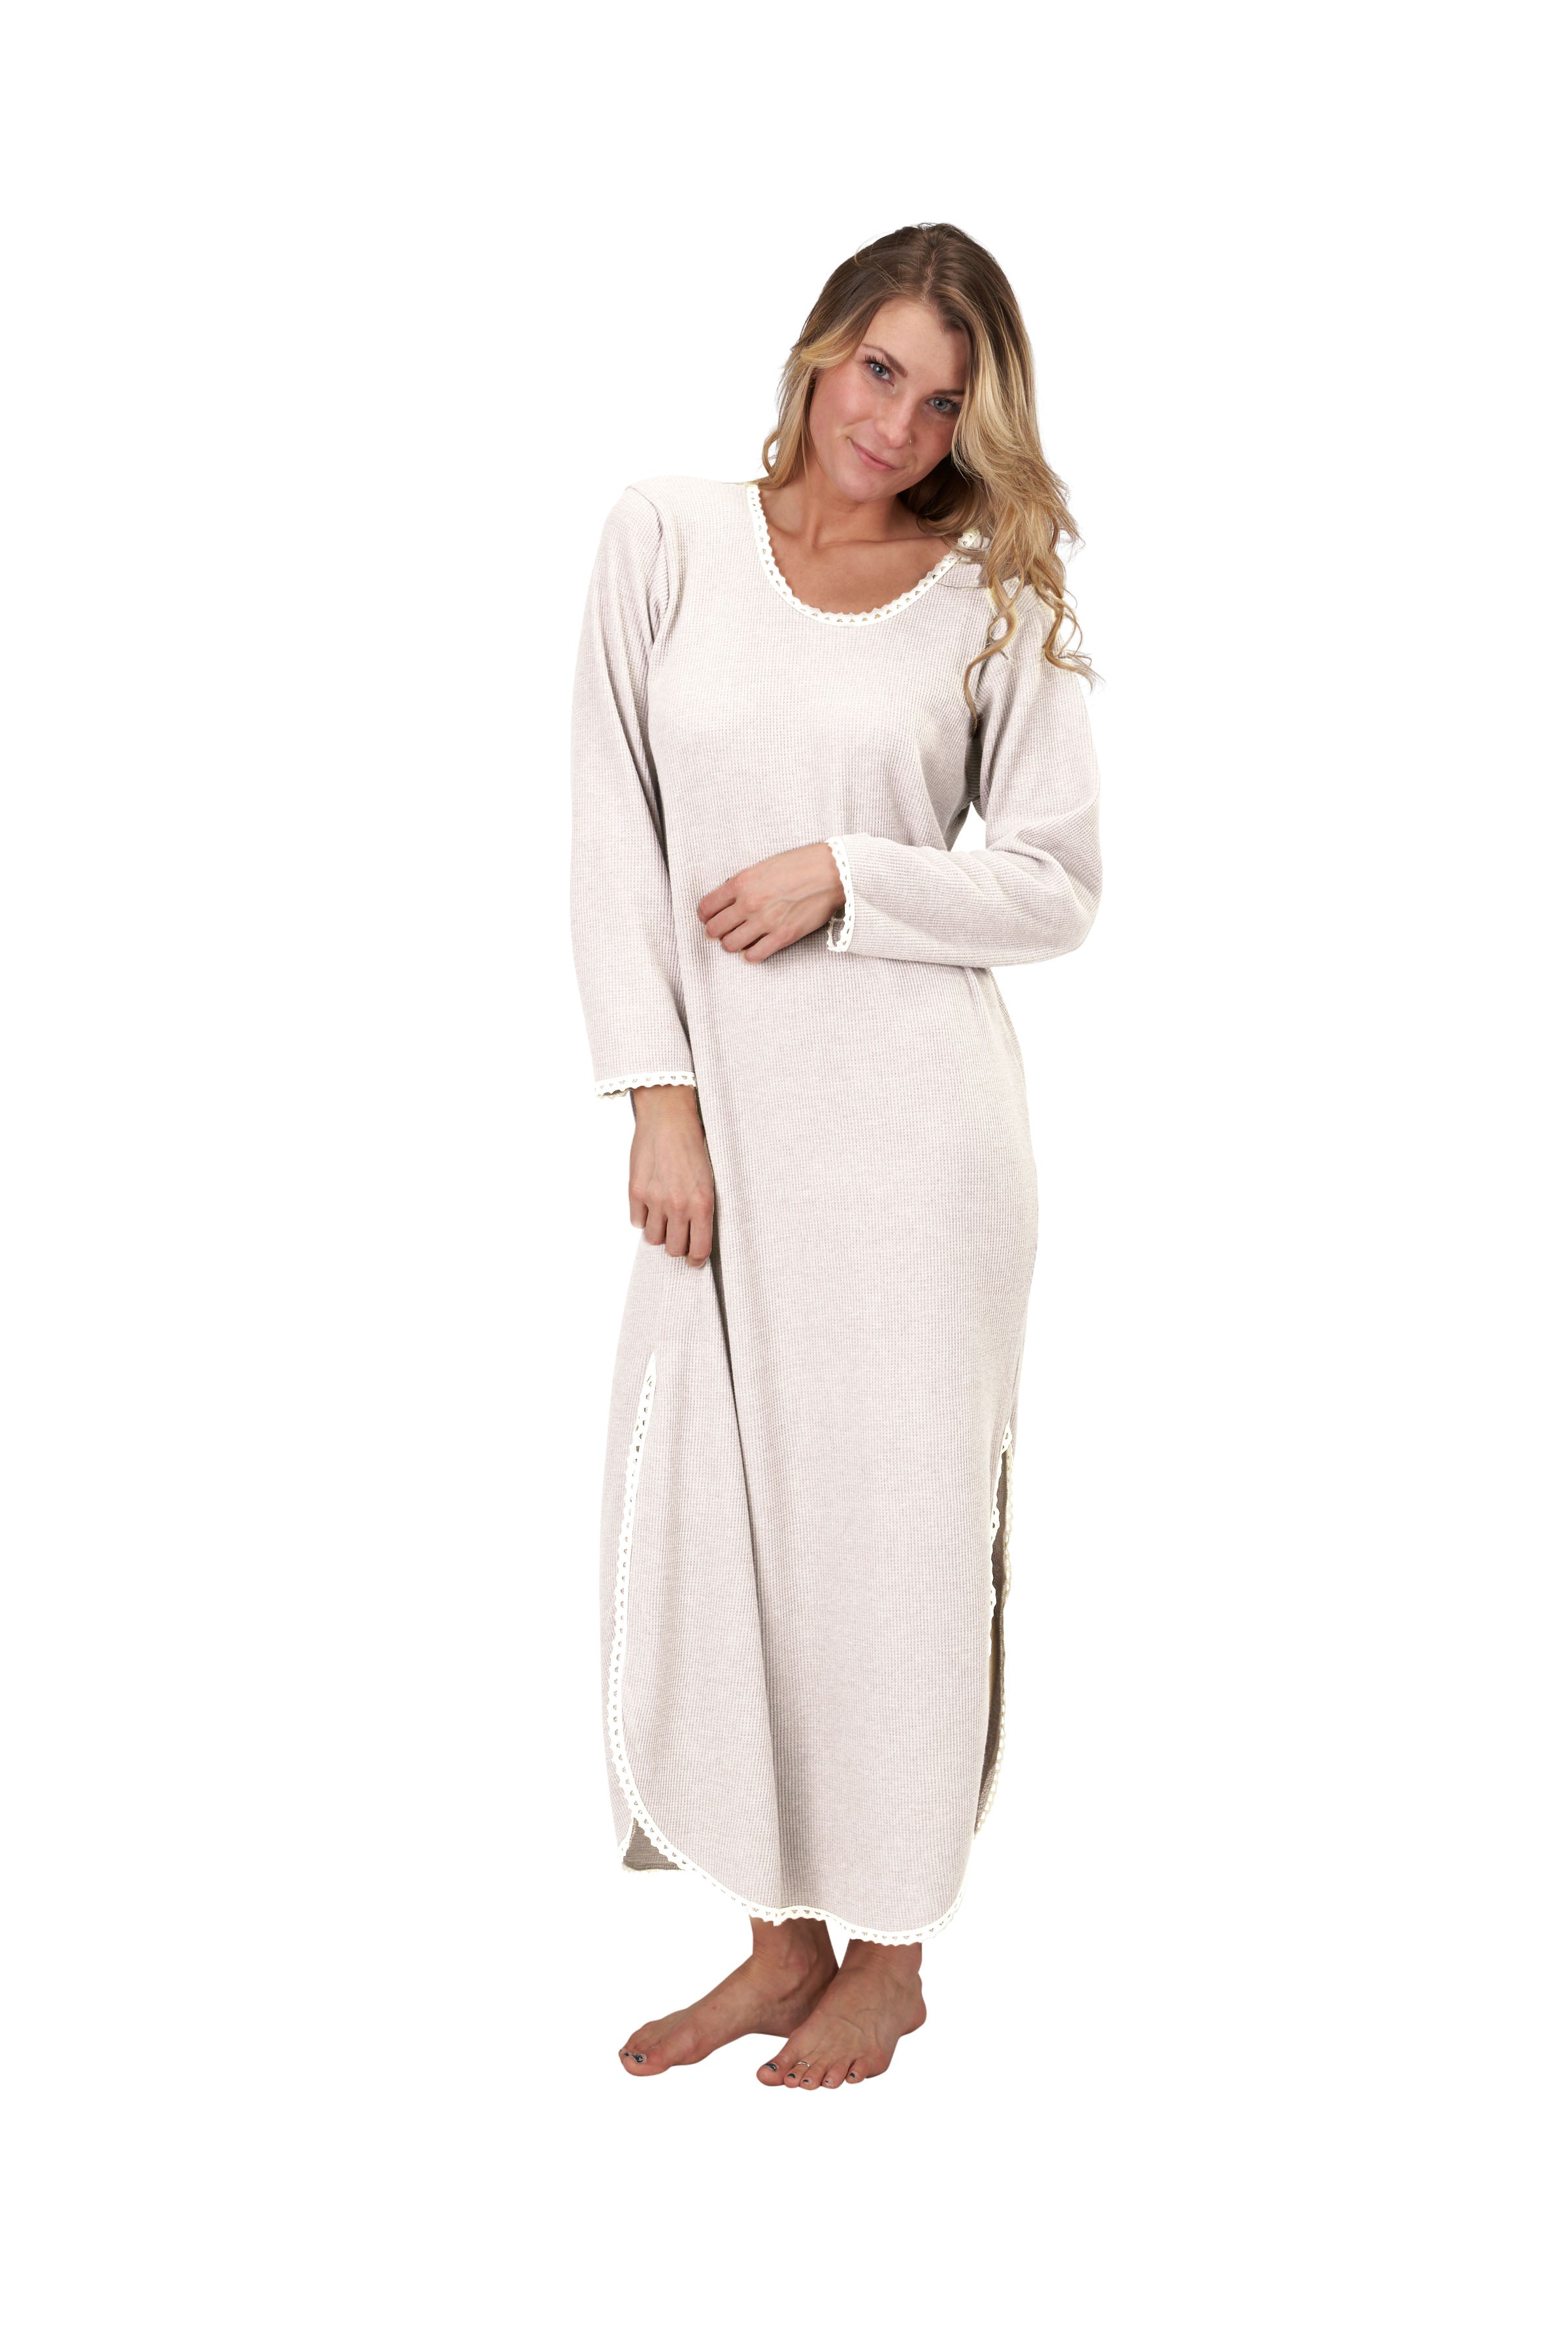 Thermal & Lace Nightgown – Spiritex